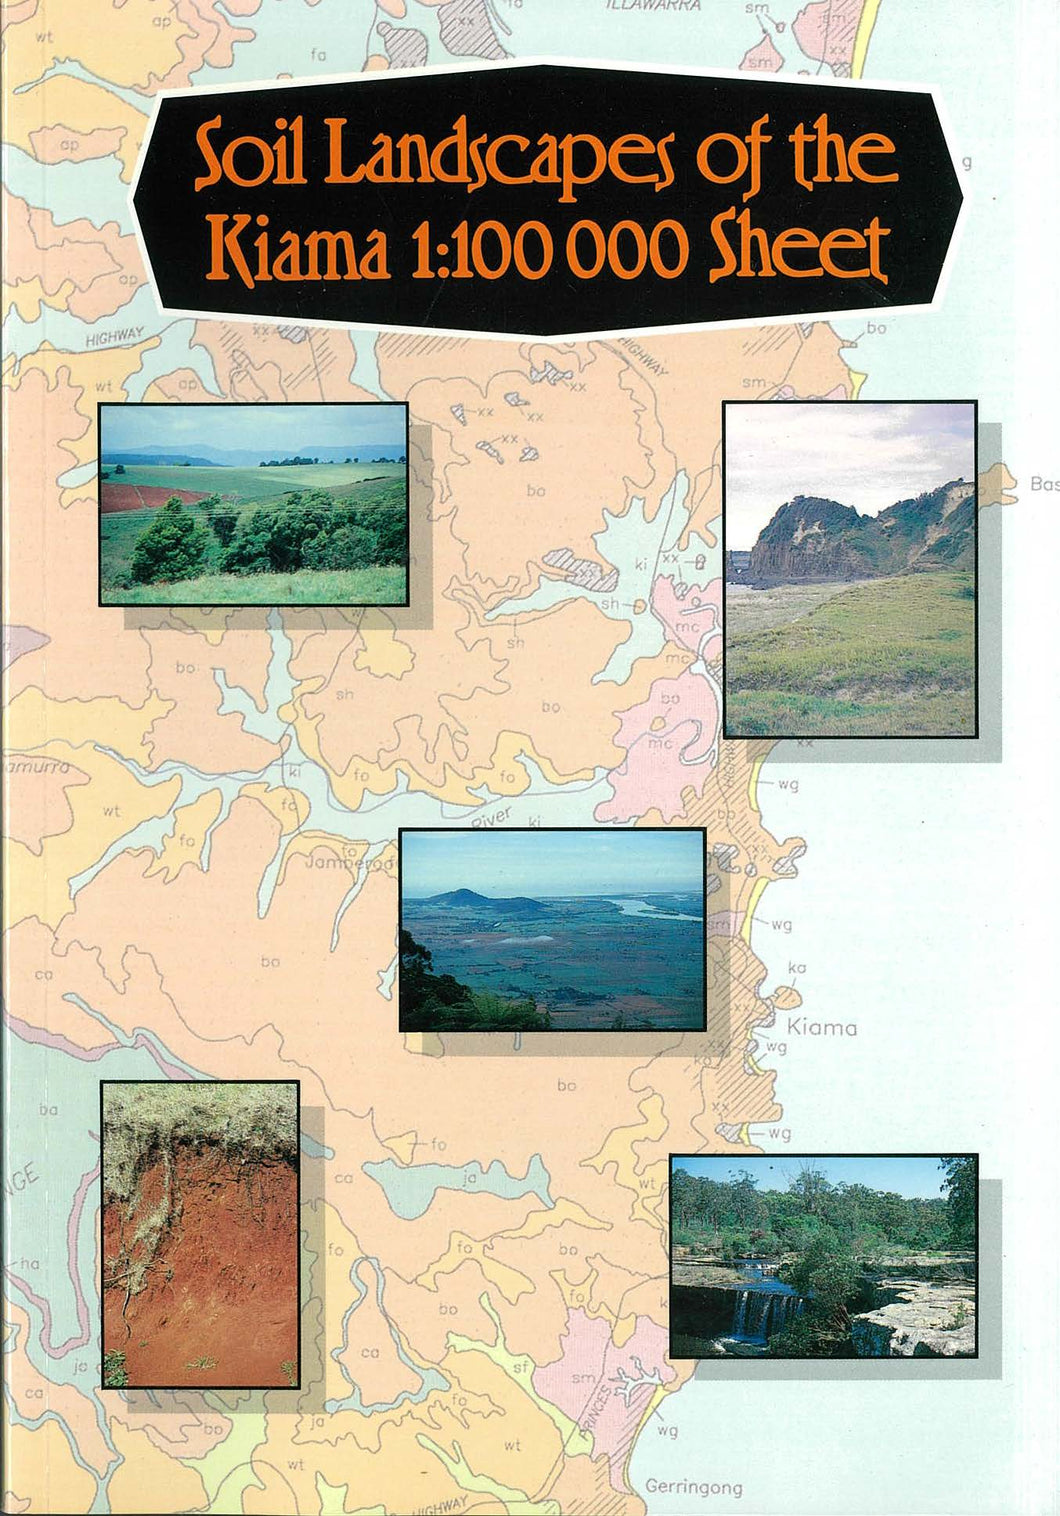 Soil Landscapes of the Kiama 1:100 000 Sheet report cover